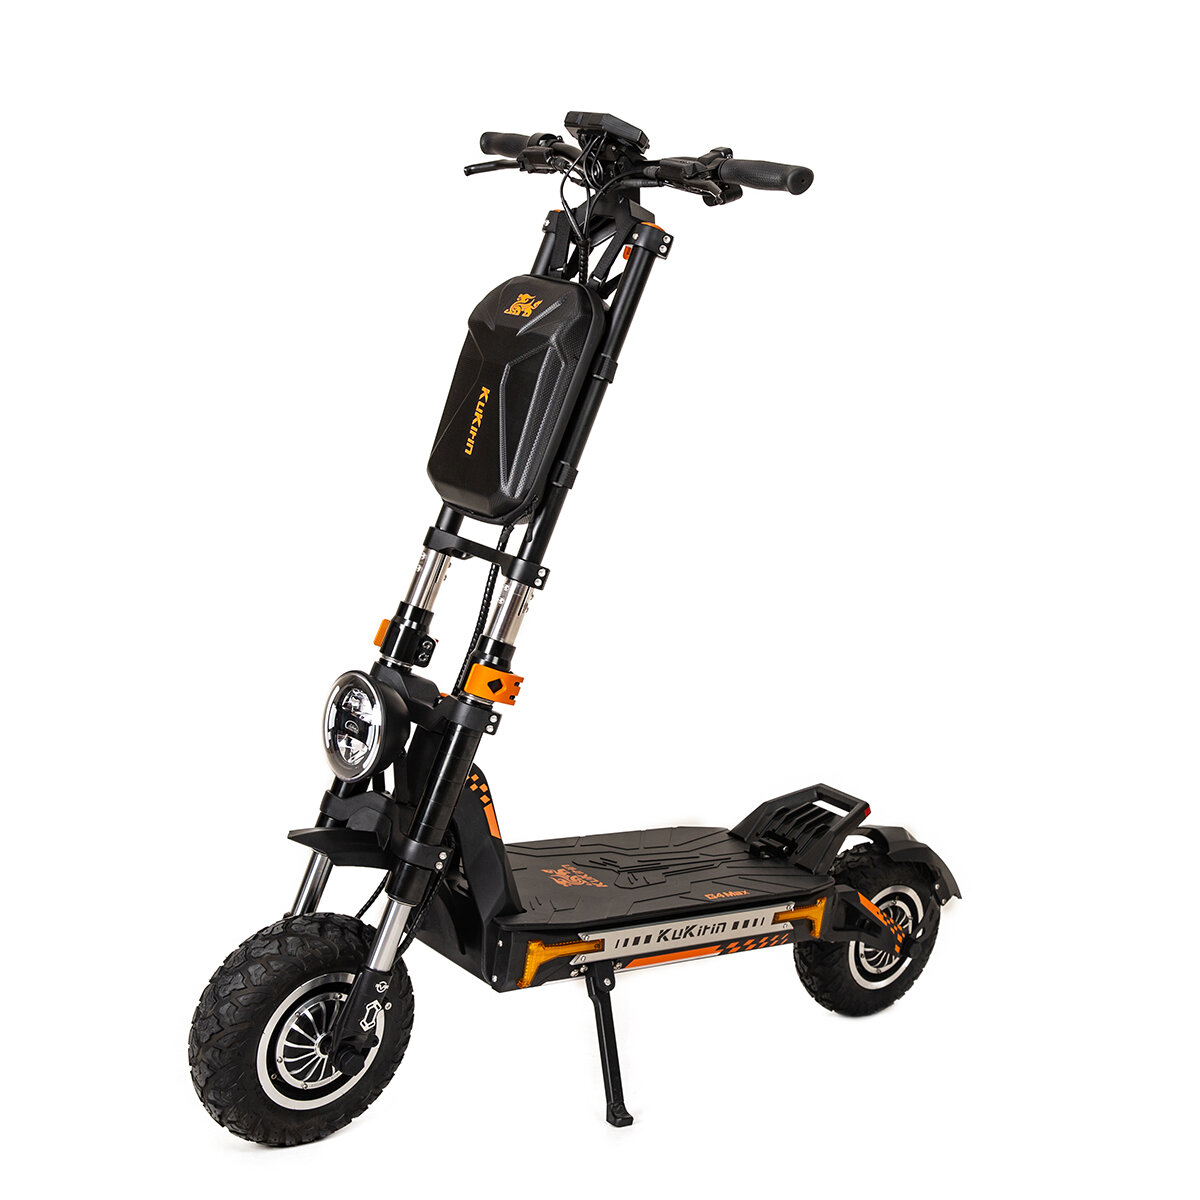 best price,kukirin,g4,max,electric,scooter,60v,35.2ah,1600wx2,12,inch,electric,scooter,eu,coupon,price,discount